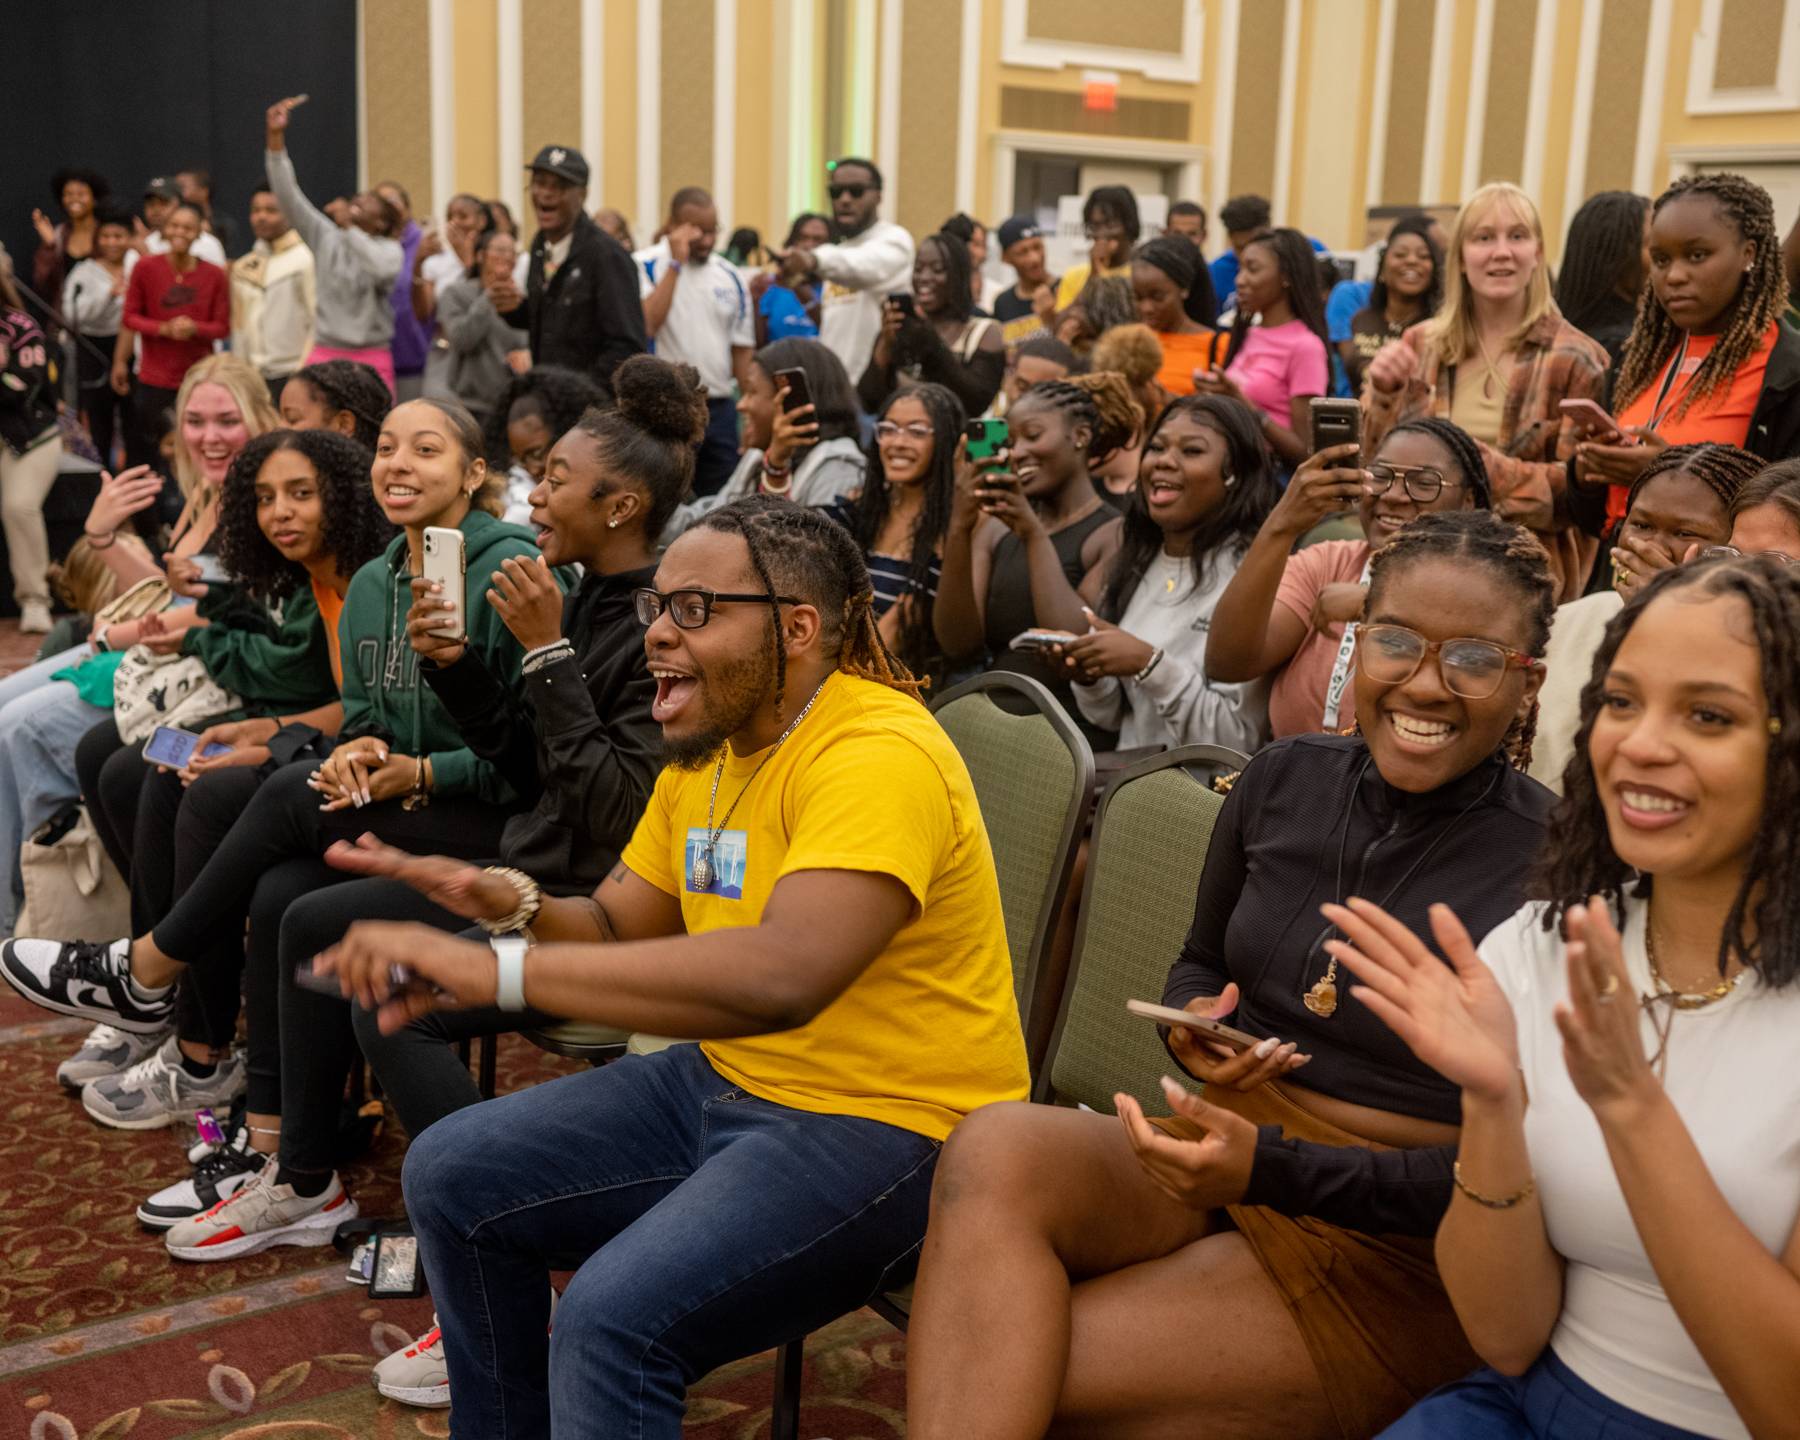 Students react to a performance at the Multicultural Student Expo in the Baker Ballroom.